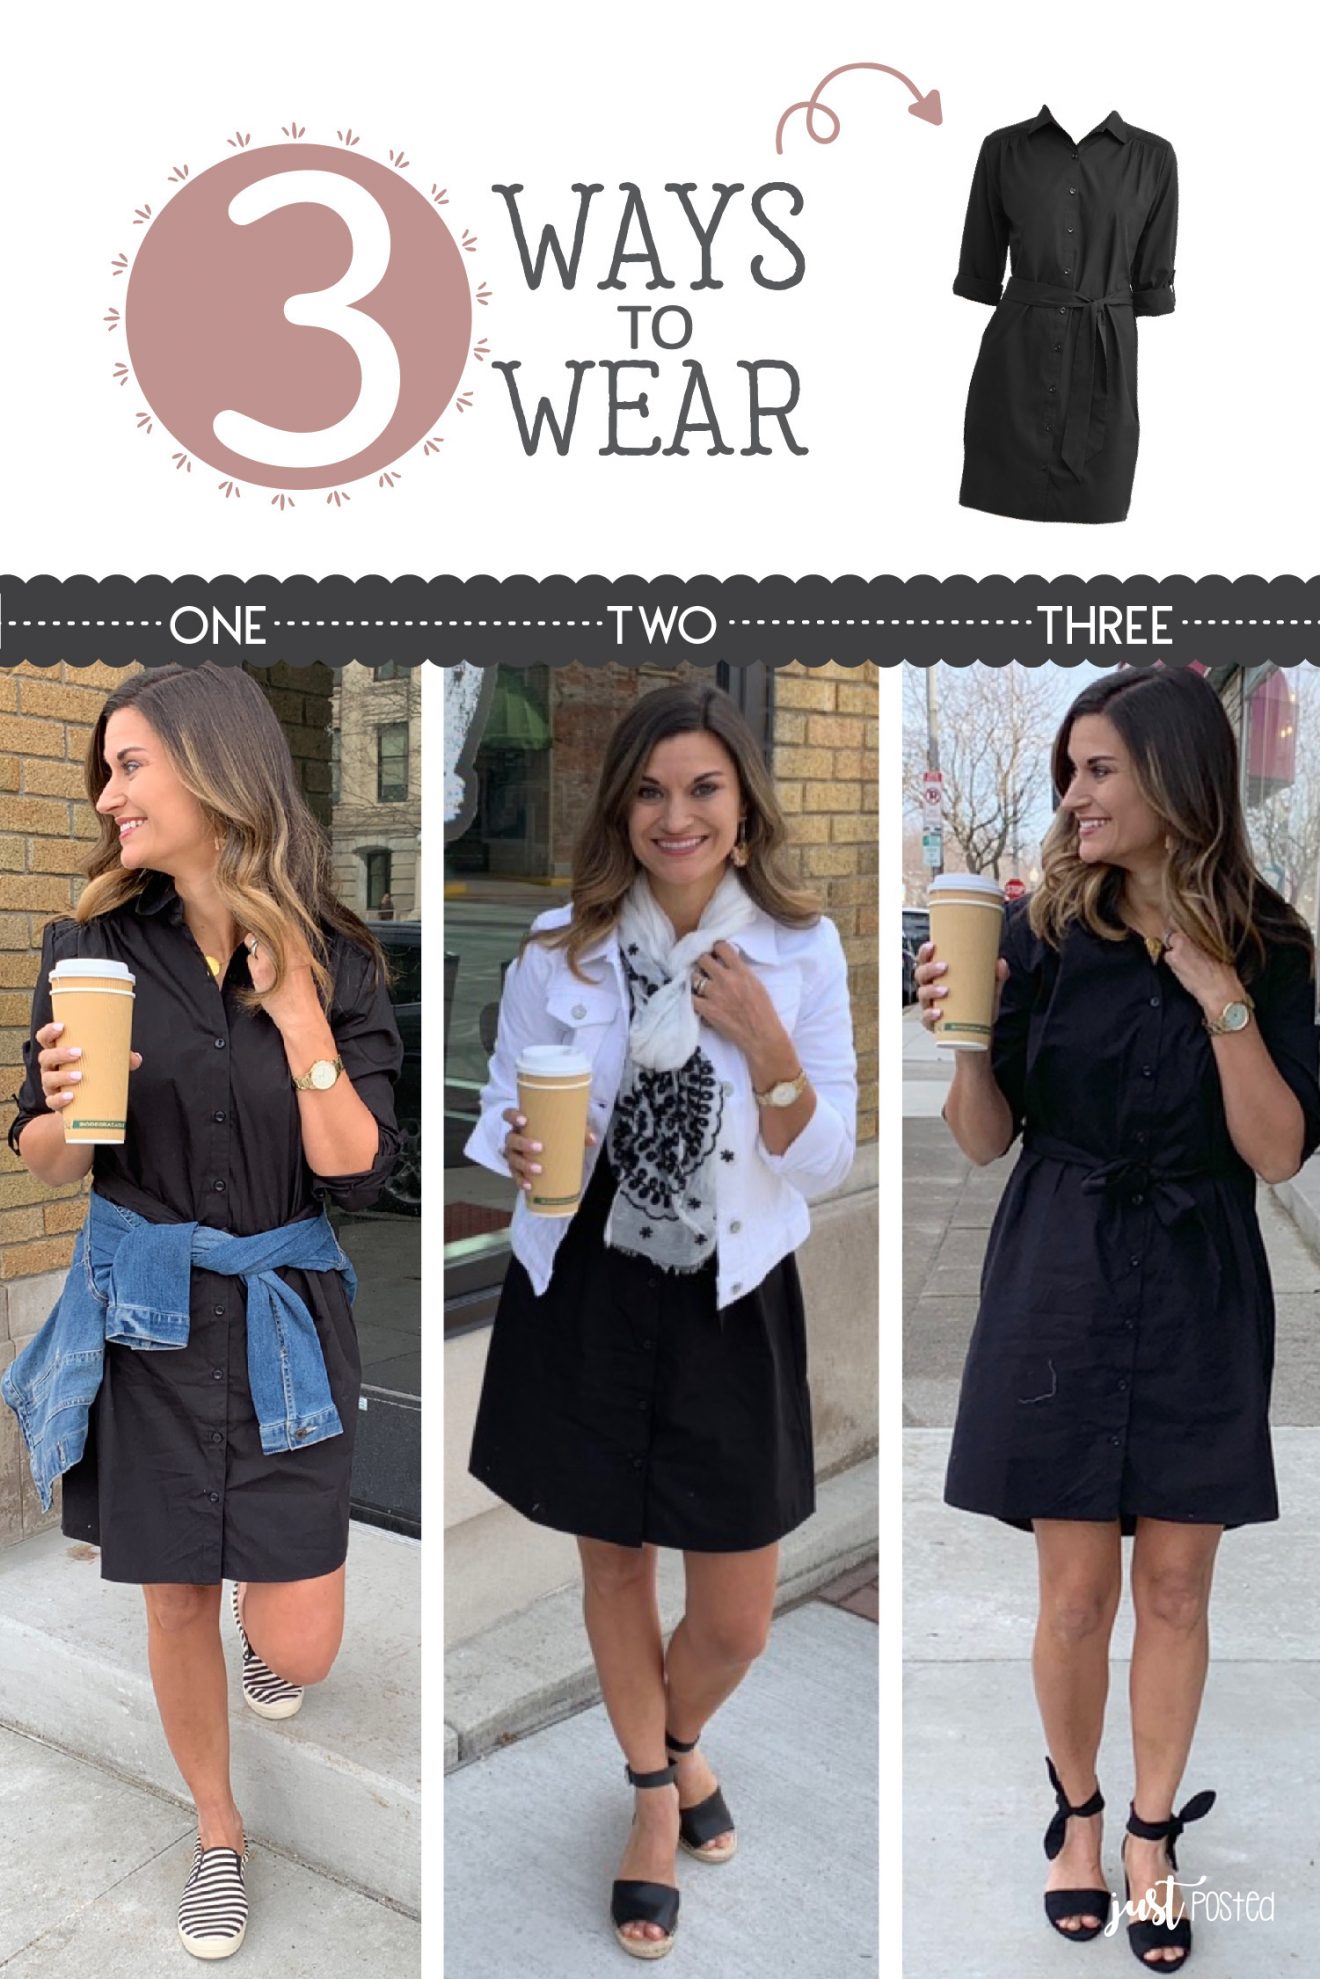 How to Wear One Black Dress Three Ways – Just Posted